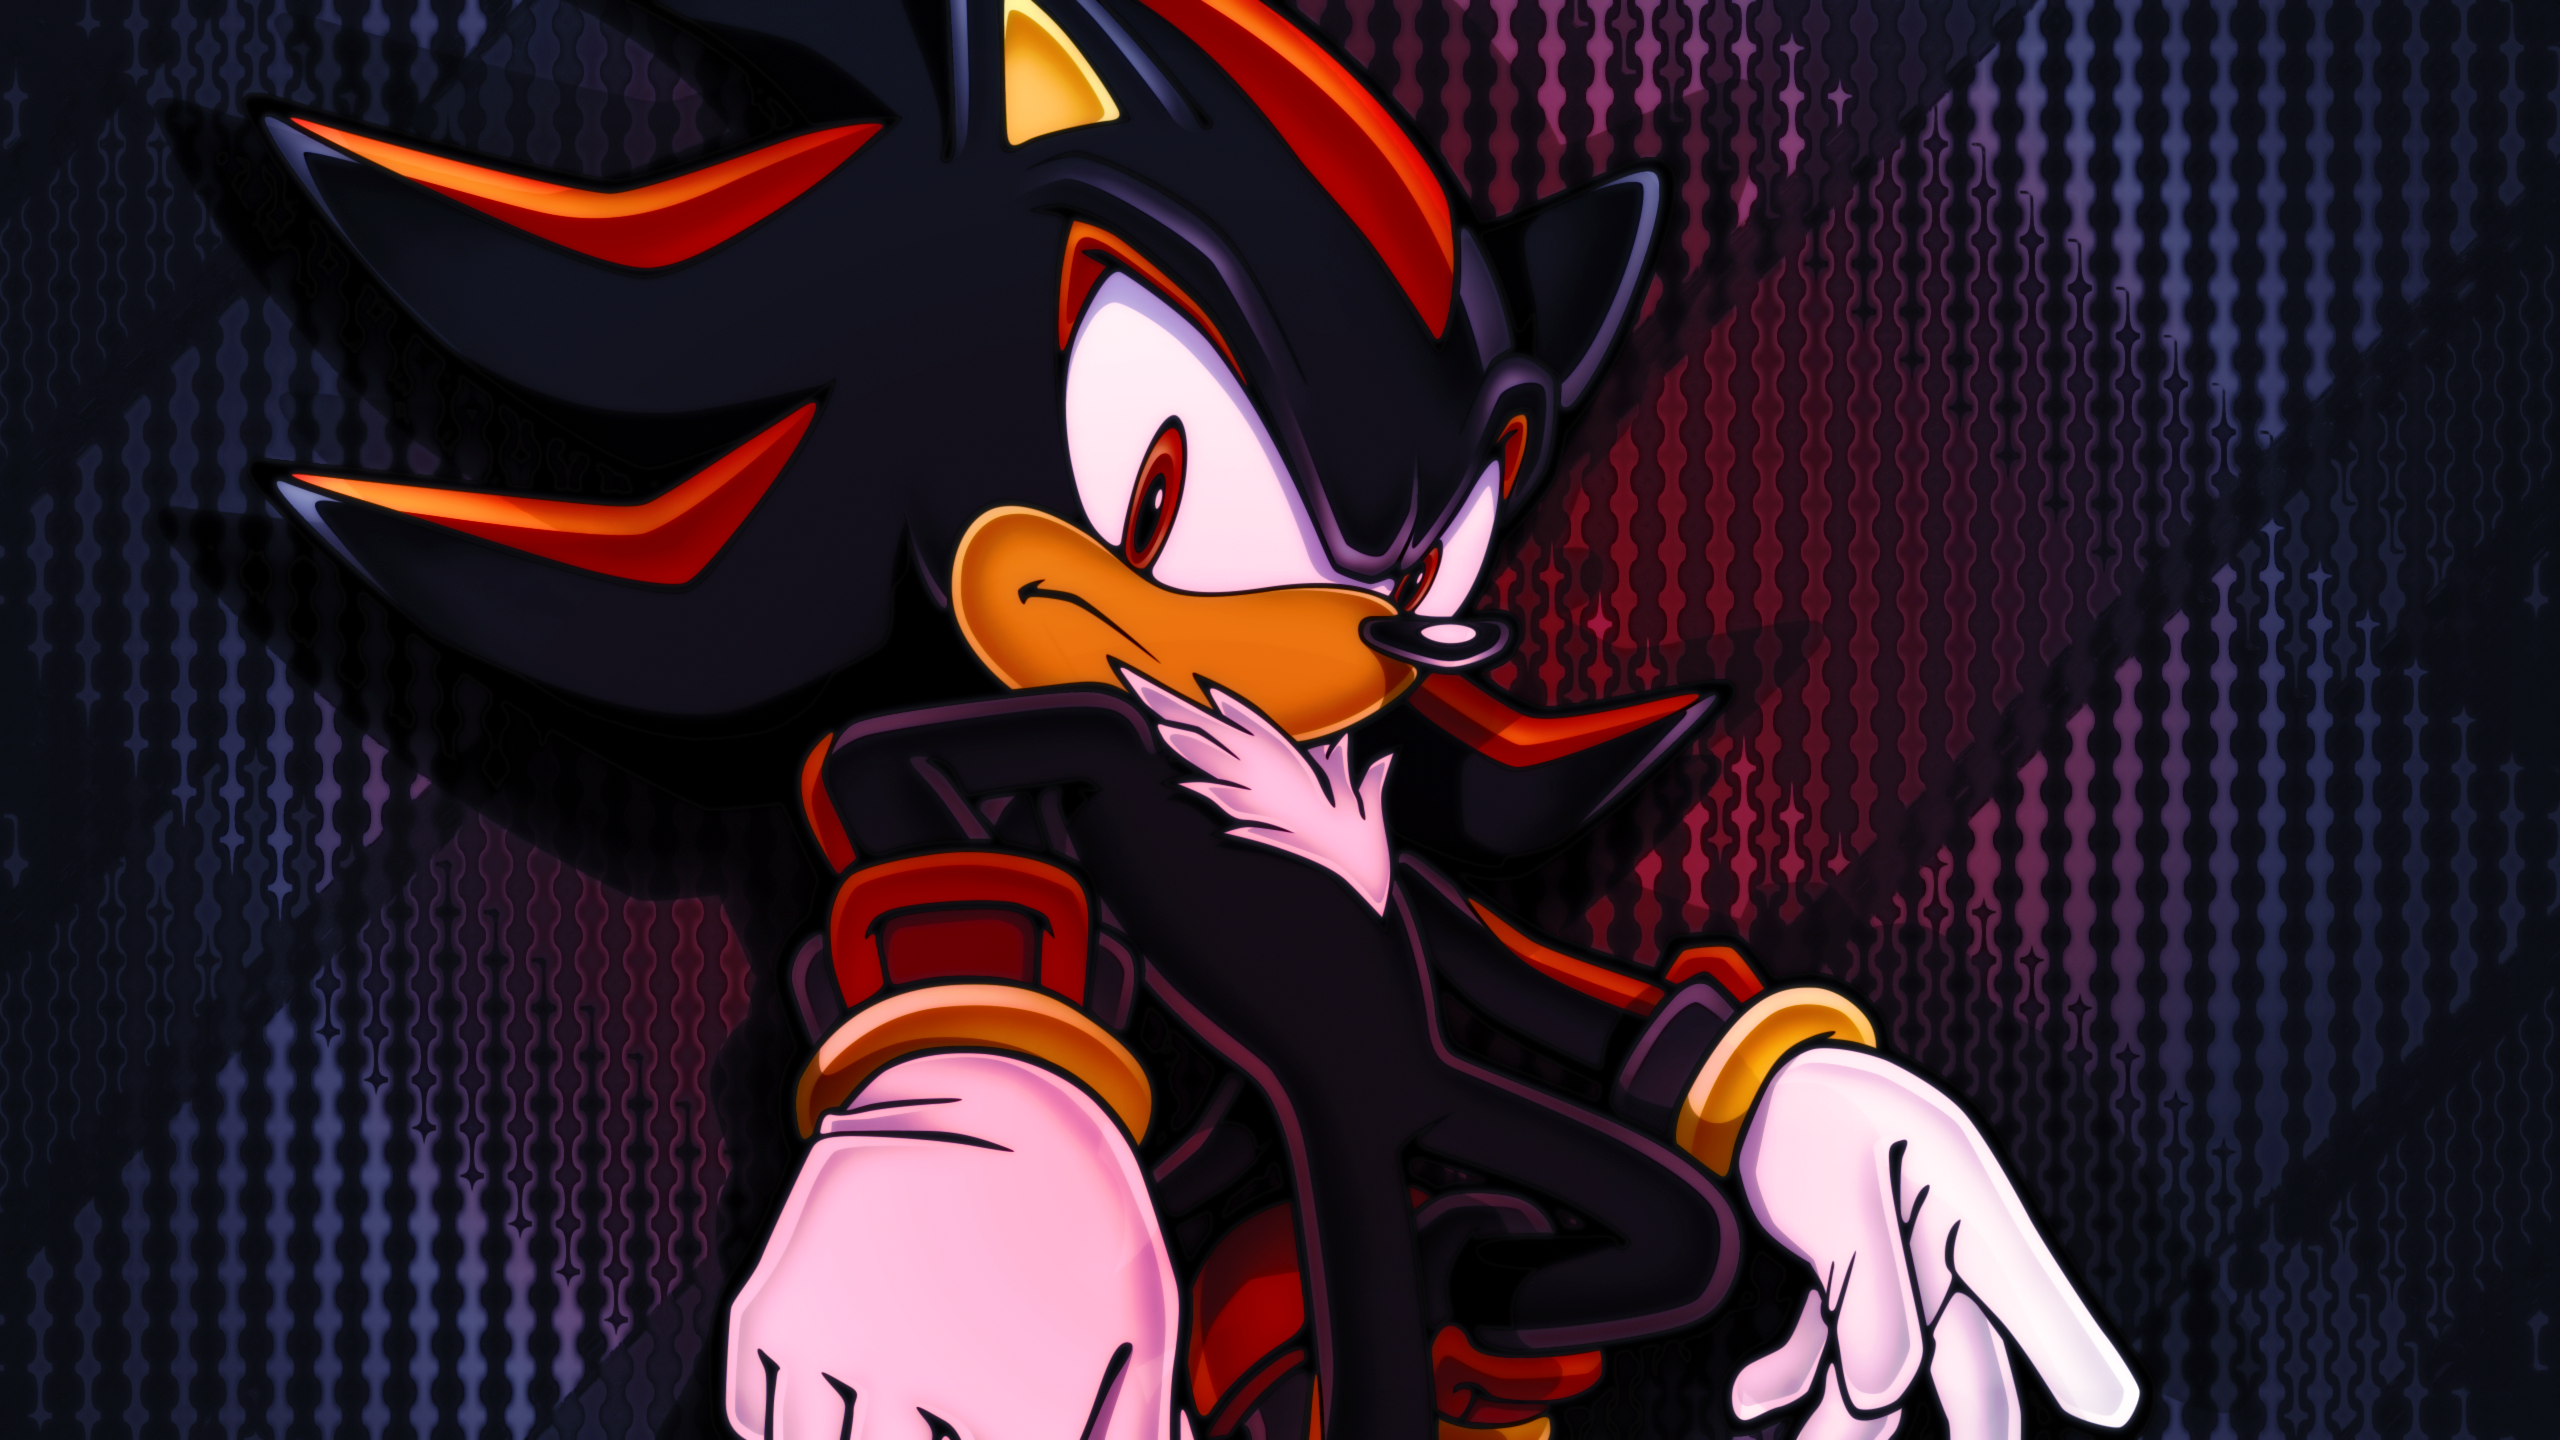 Shadow the Hedgehog from Sonic Adventure 2 by Light-Rock